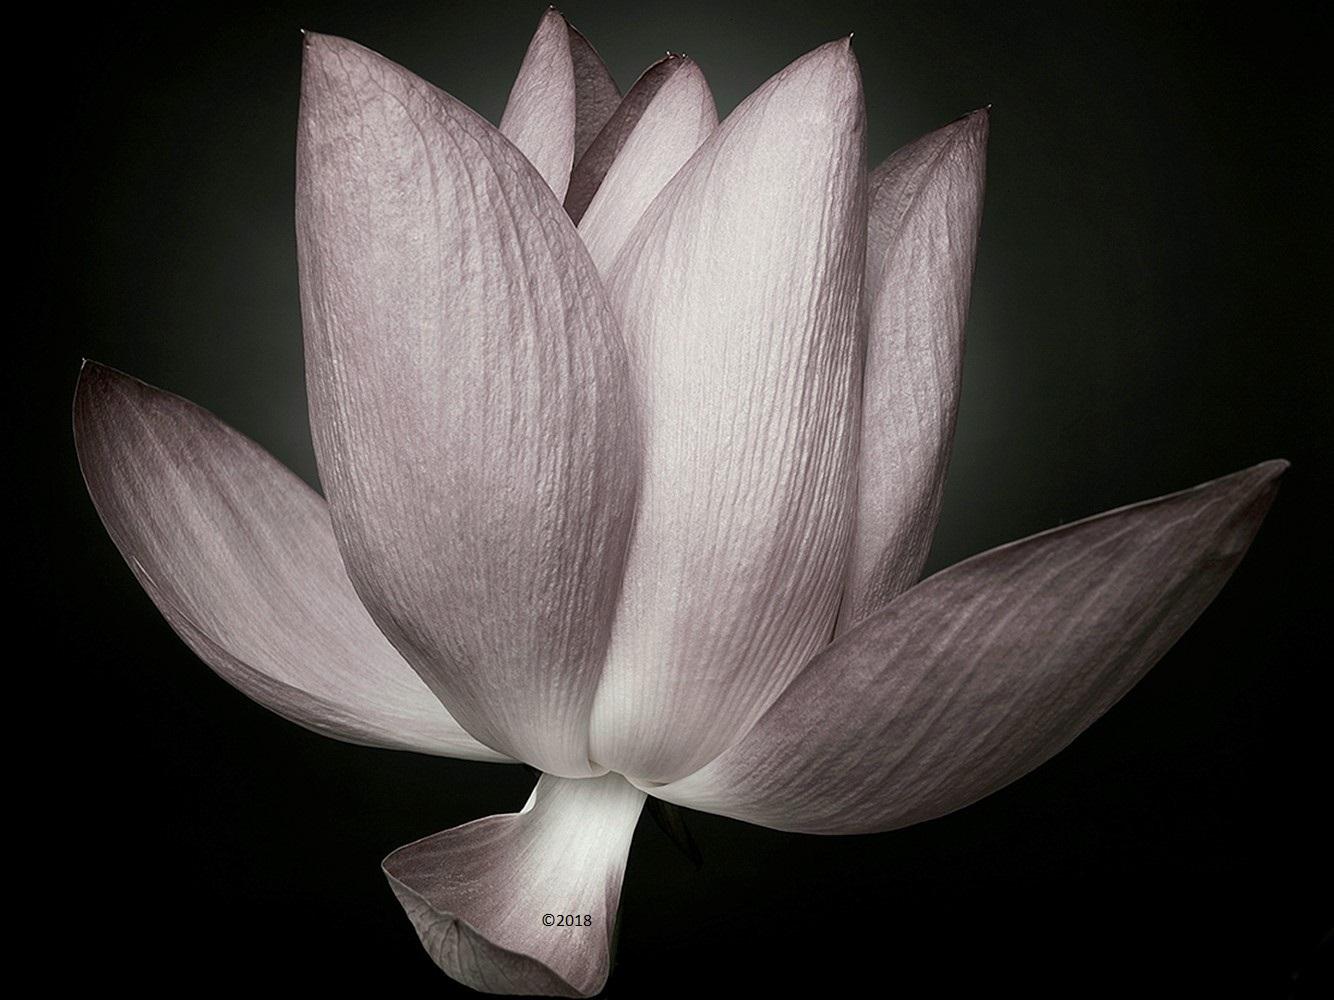 Zen Beauty - Contemporary Floral Still Life - Flower photography series - Lotus